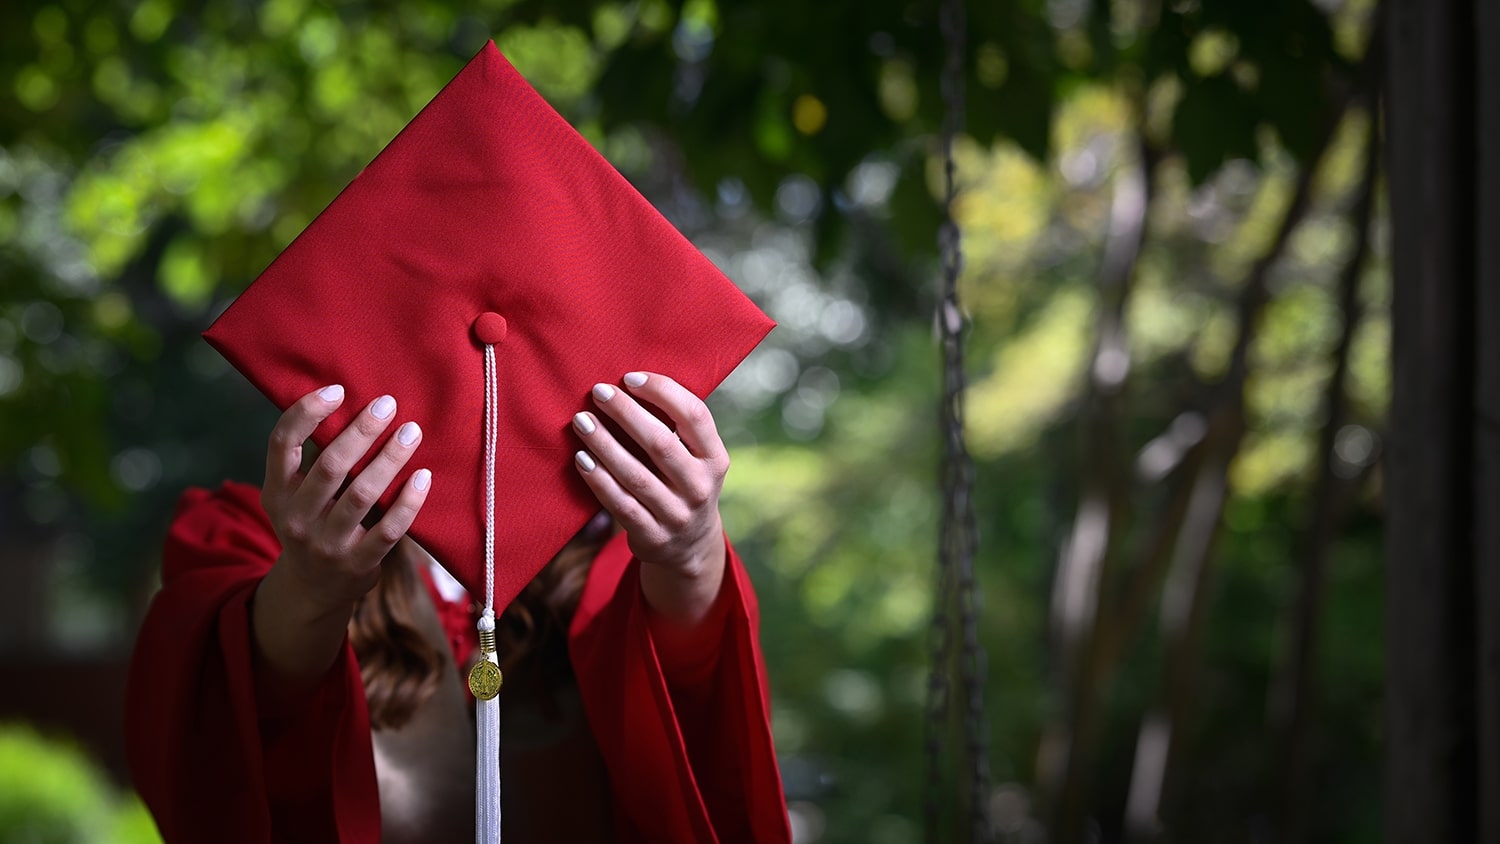 A student wearing a red graduation gown holds up her mortar board in front of her face.